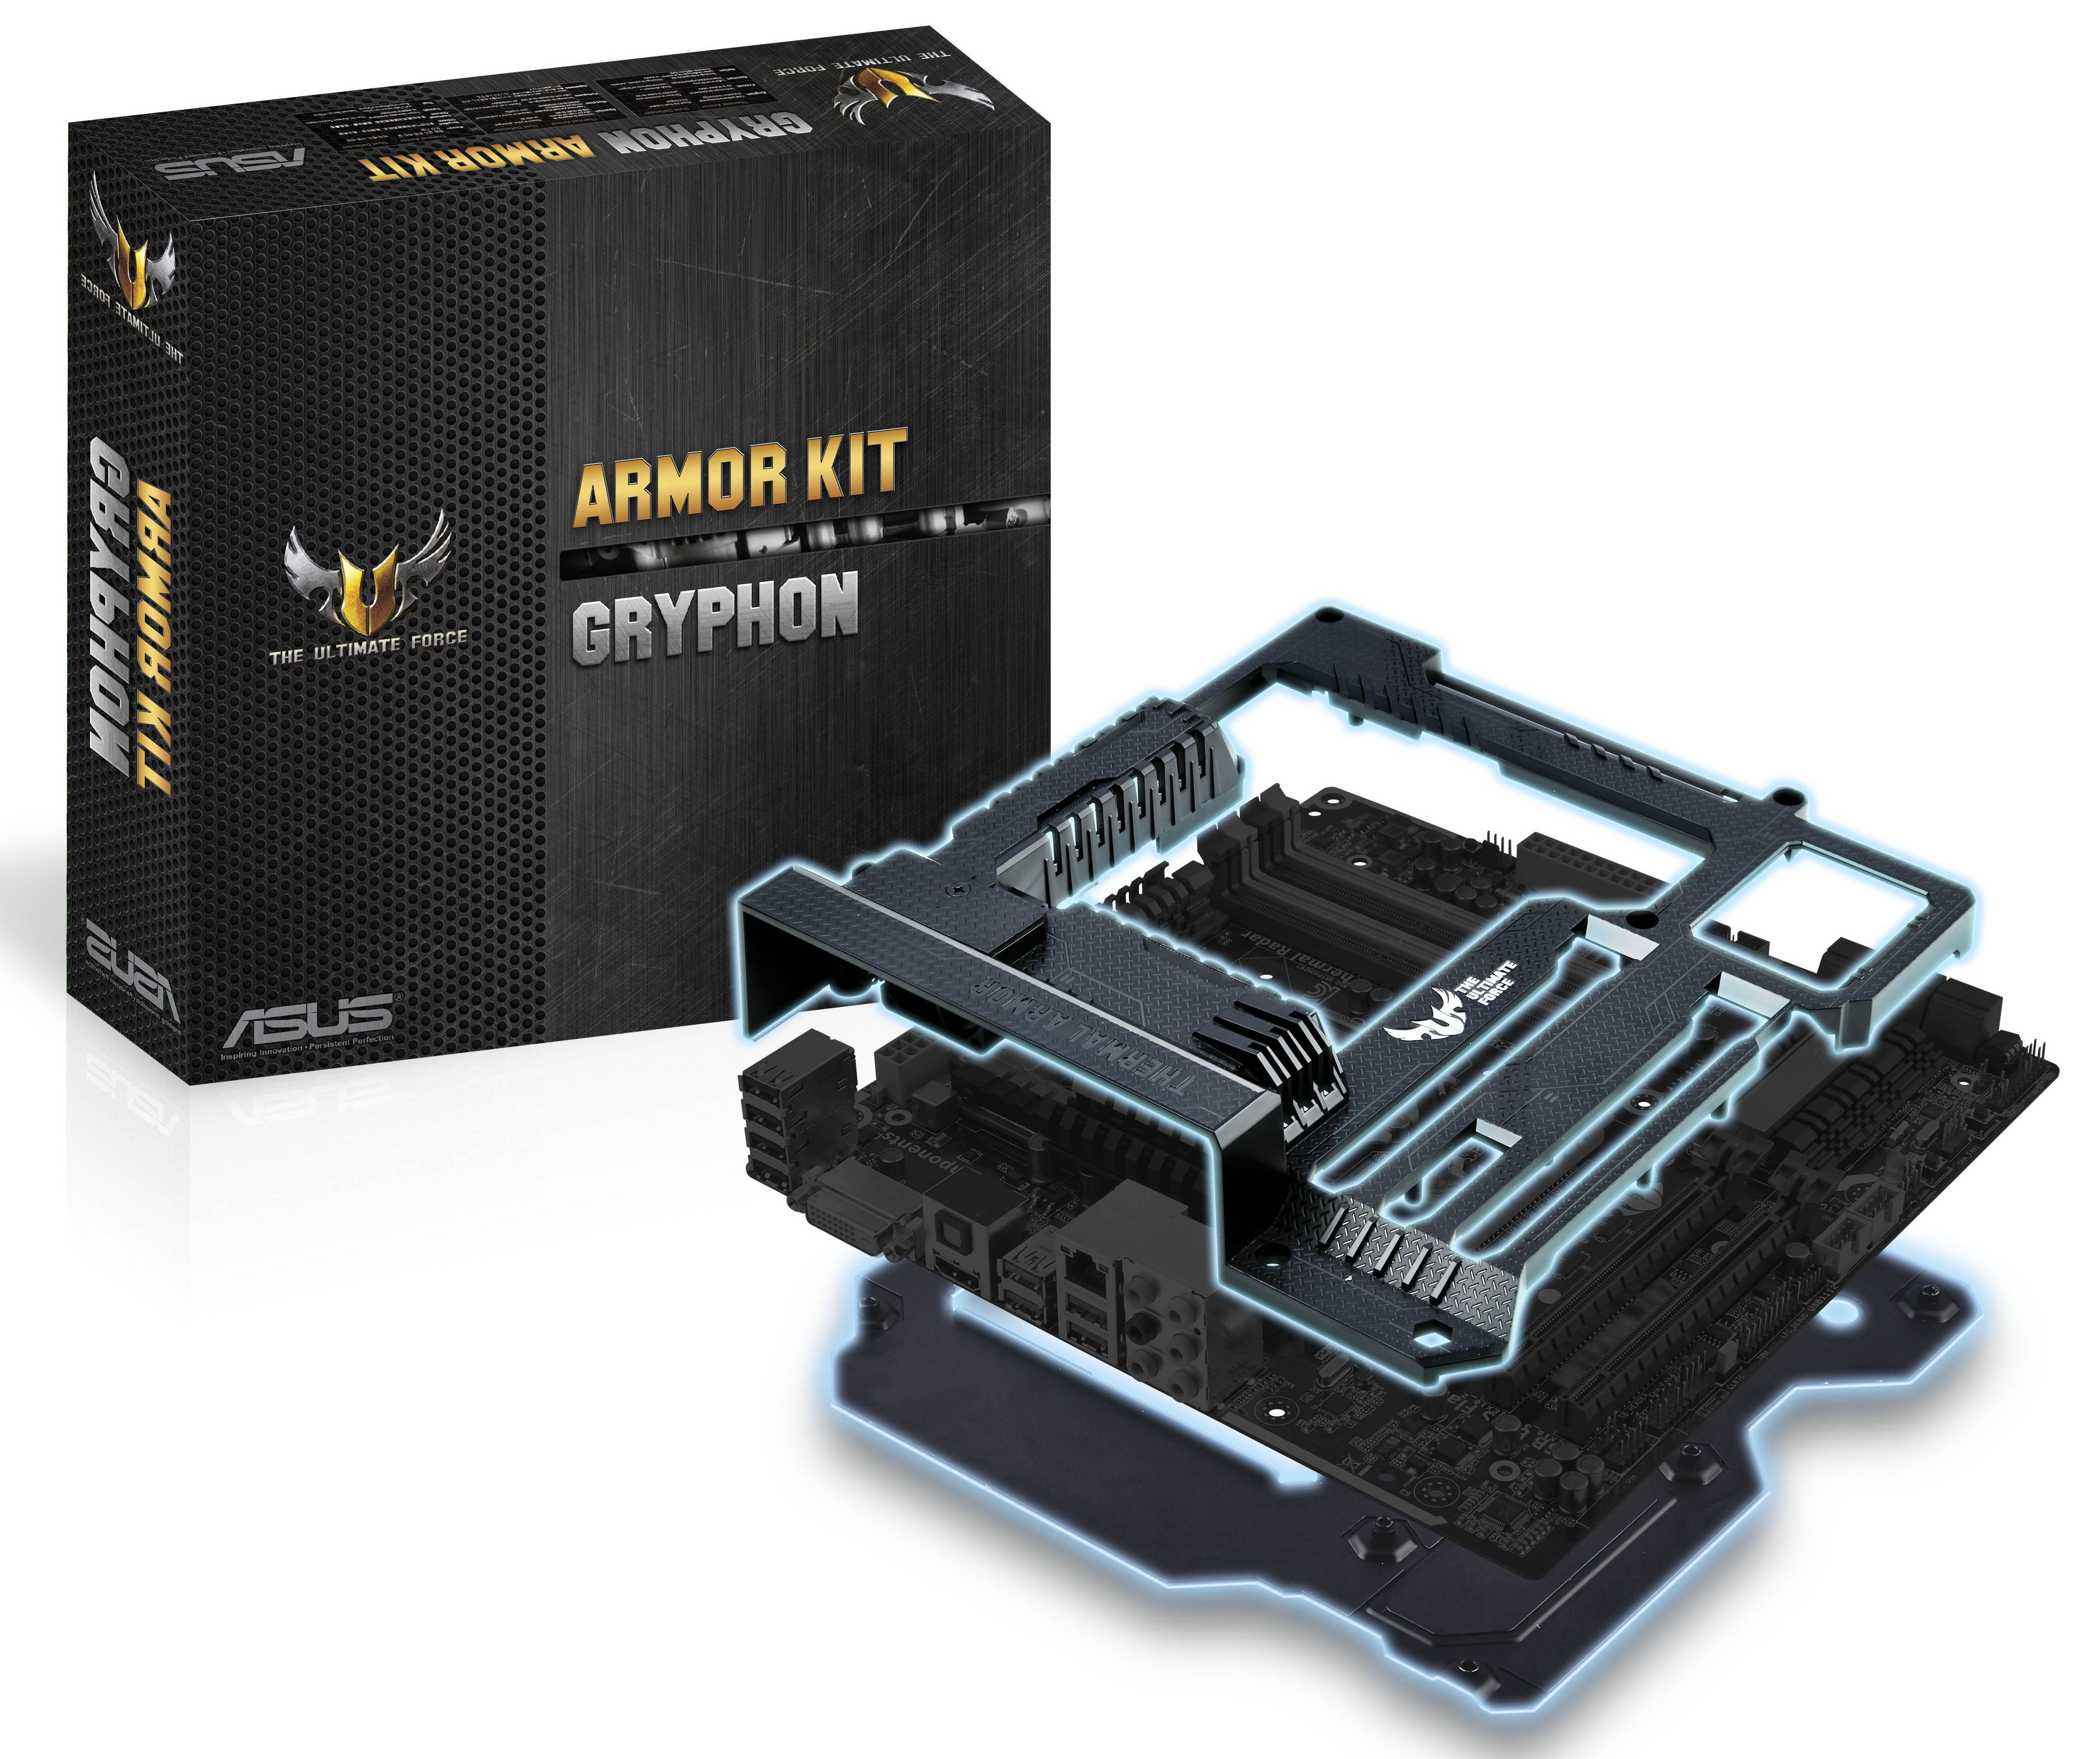 ASUS Z87 - Haswell Z87 Motherboard Preview: 50+ Motherboards from ASUS